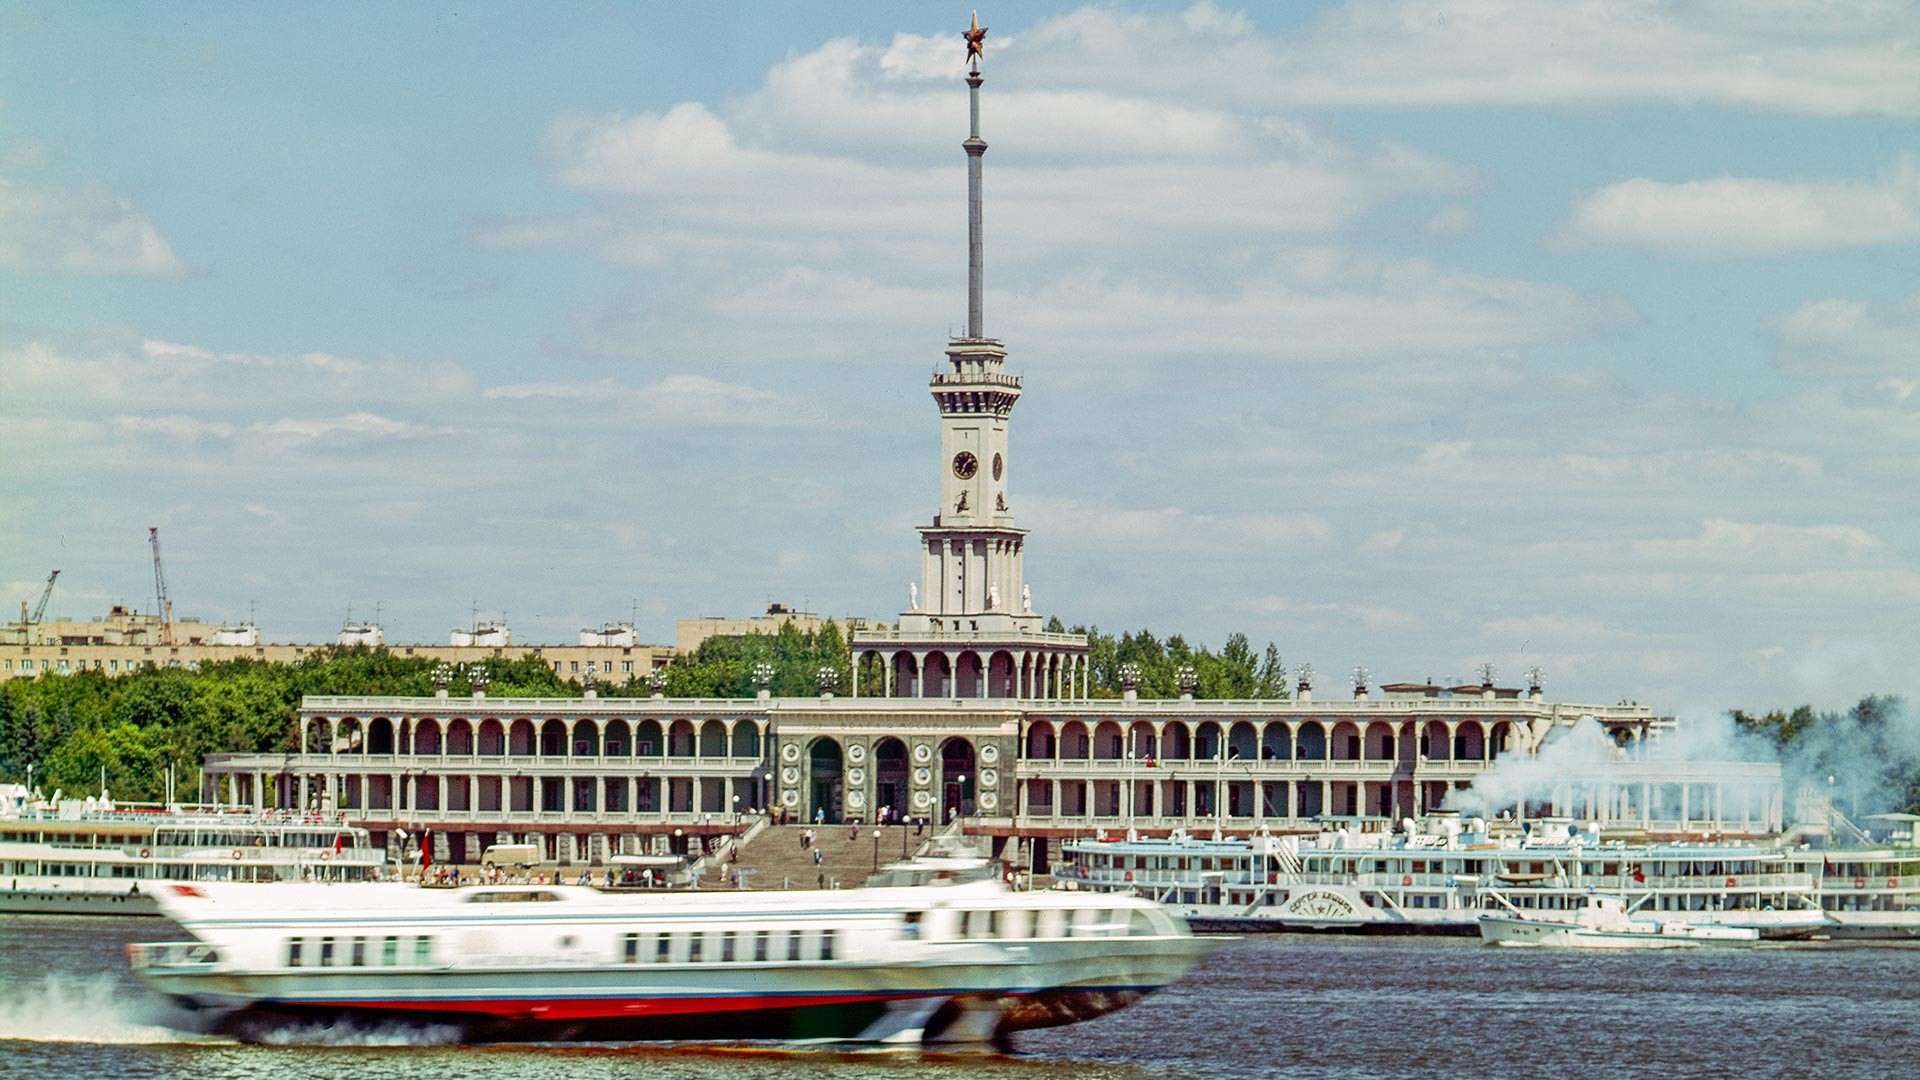 The North River Terminal in Moscow.